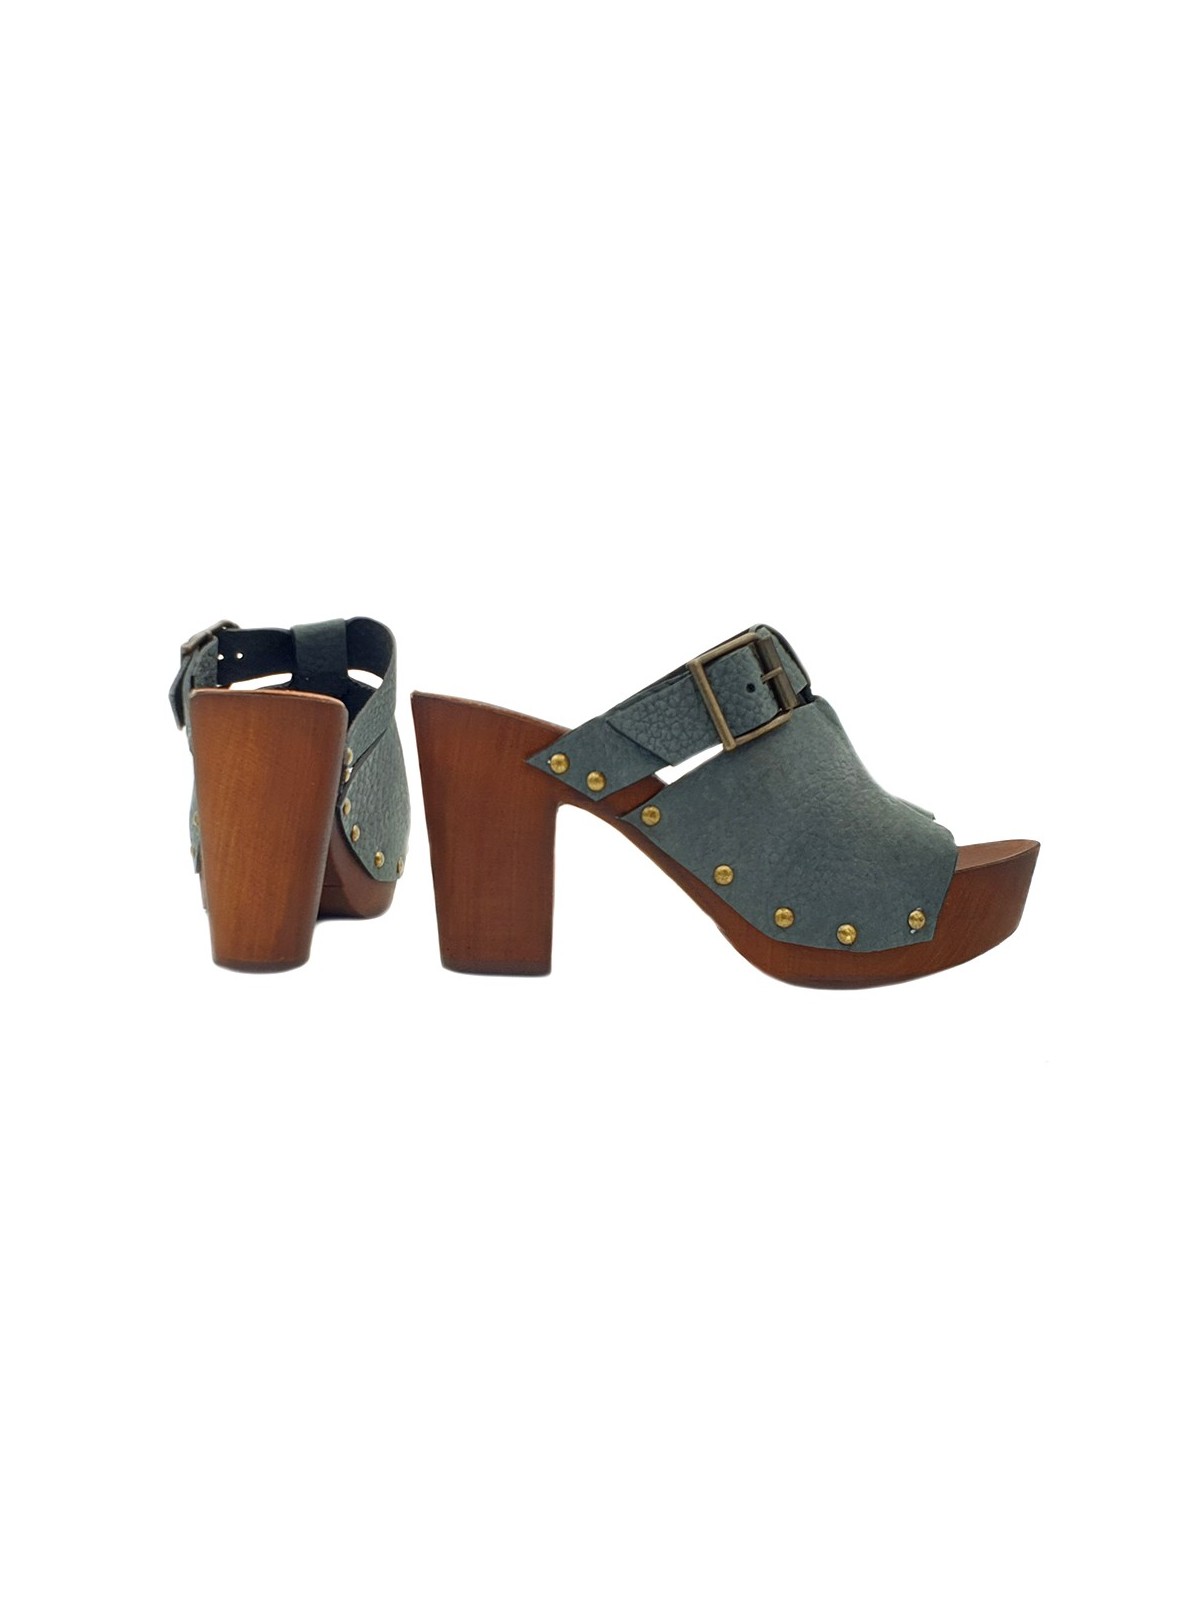 BLUE CLOGS IN LEATHER AND COMFY HEEL 9